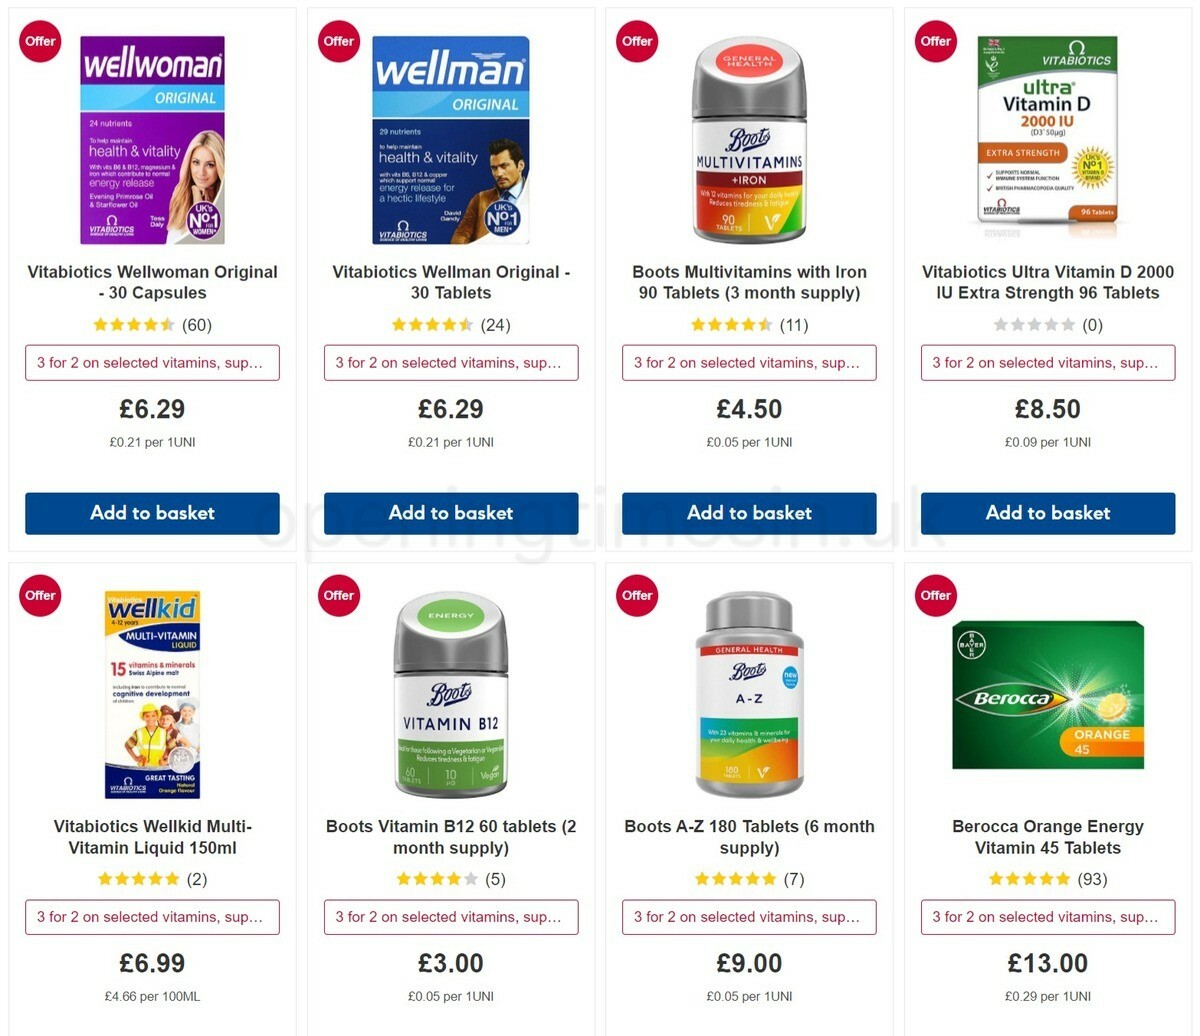 Boots Offers from 11 February